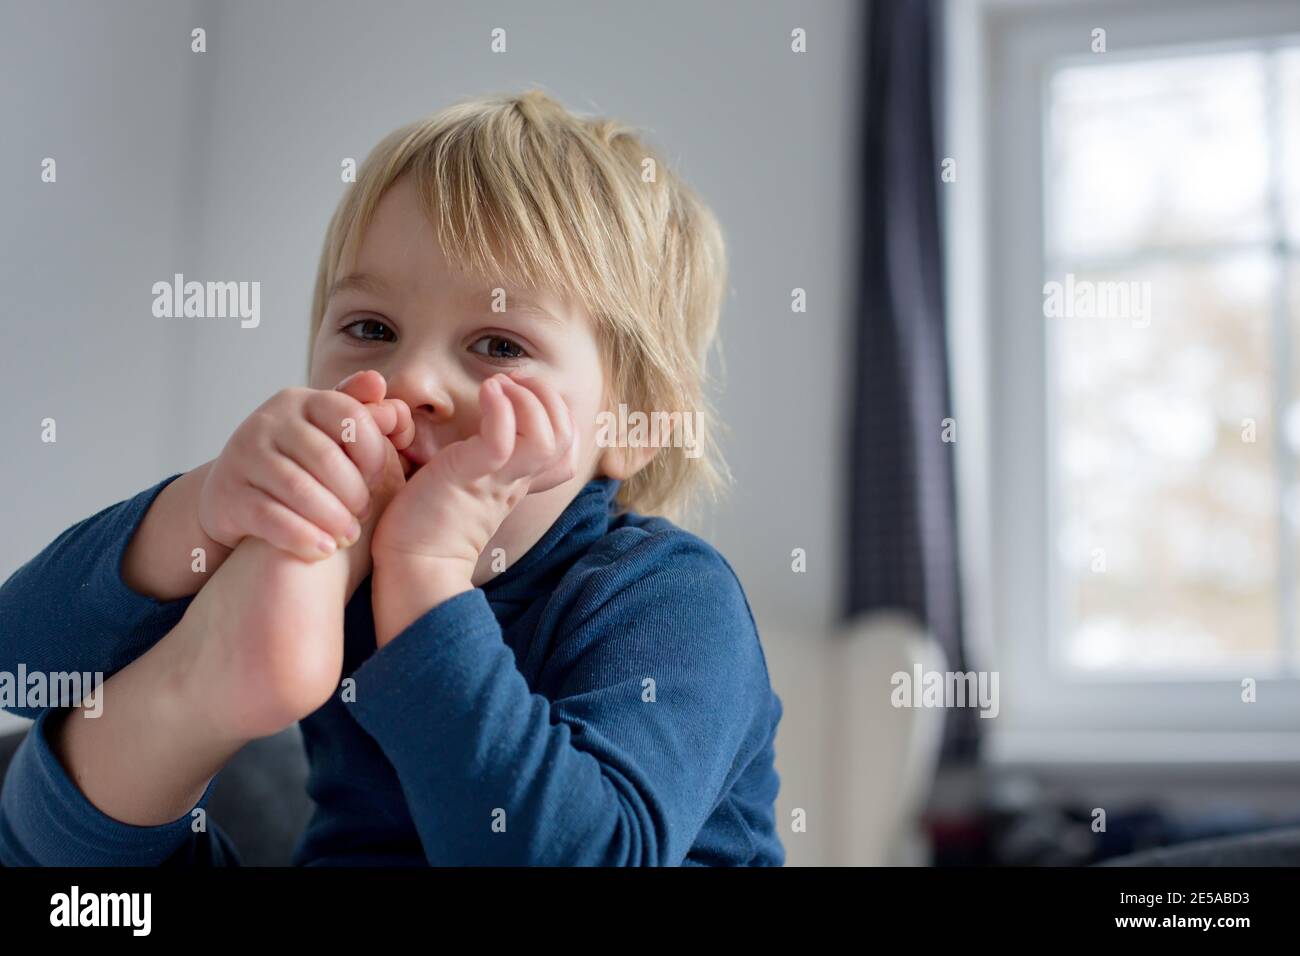 Cute blond toddler child, sucking his foot thumb, making funny faces, laughing Stock Photo